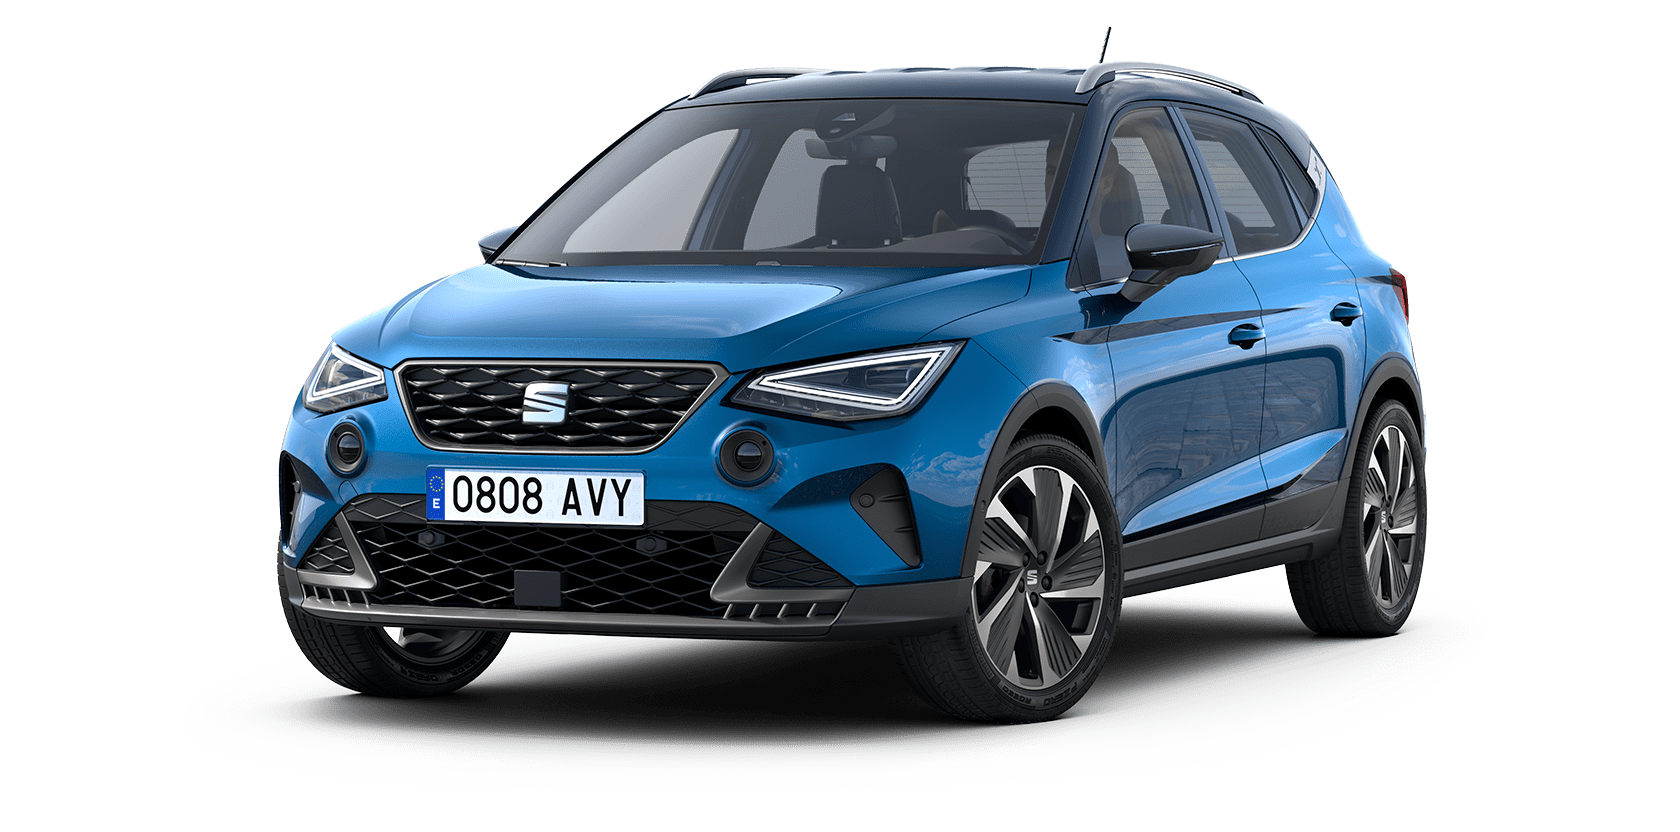 https://www.seat.fr/content/dam/public/seat-website/carworlds/new-cw-arona/overview/version-view/arona-fr/seat-arona-fr-sapphire-blue-colour.png